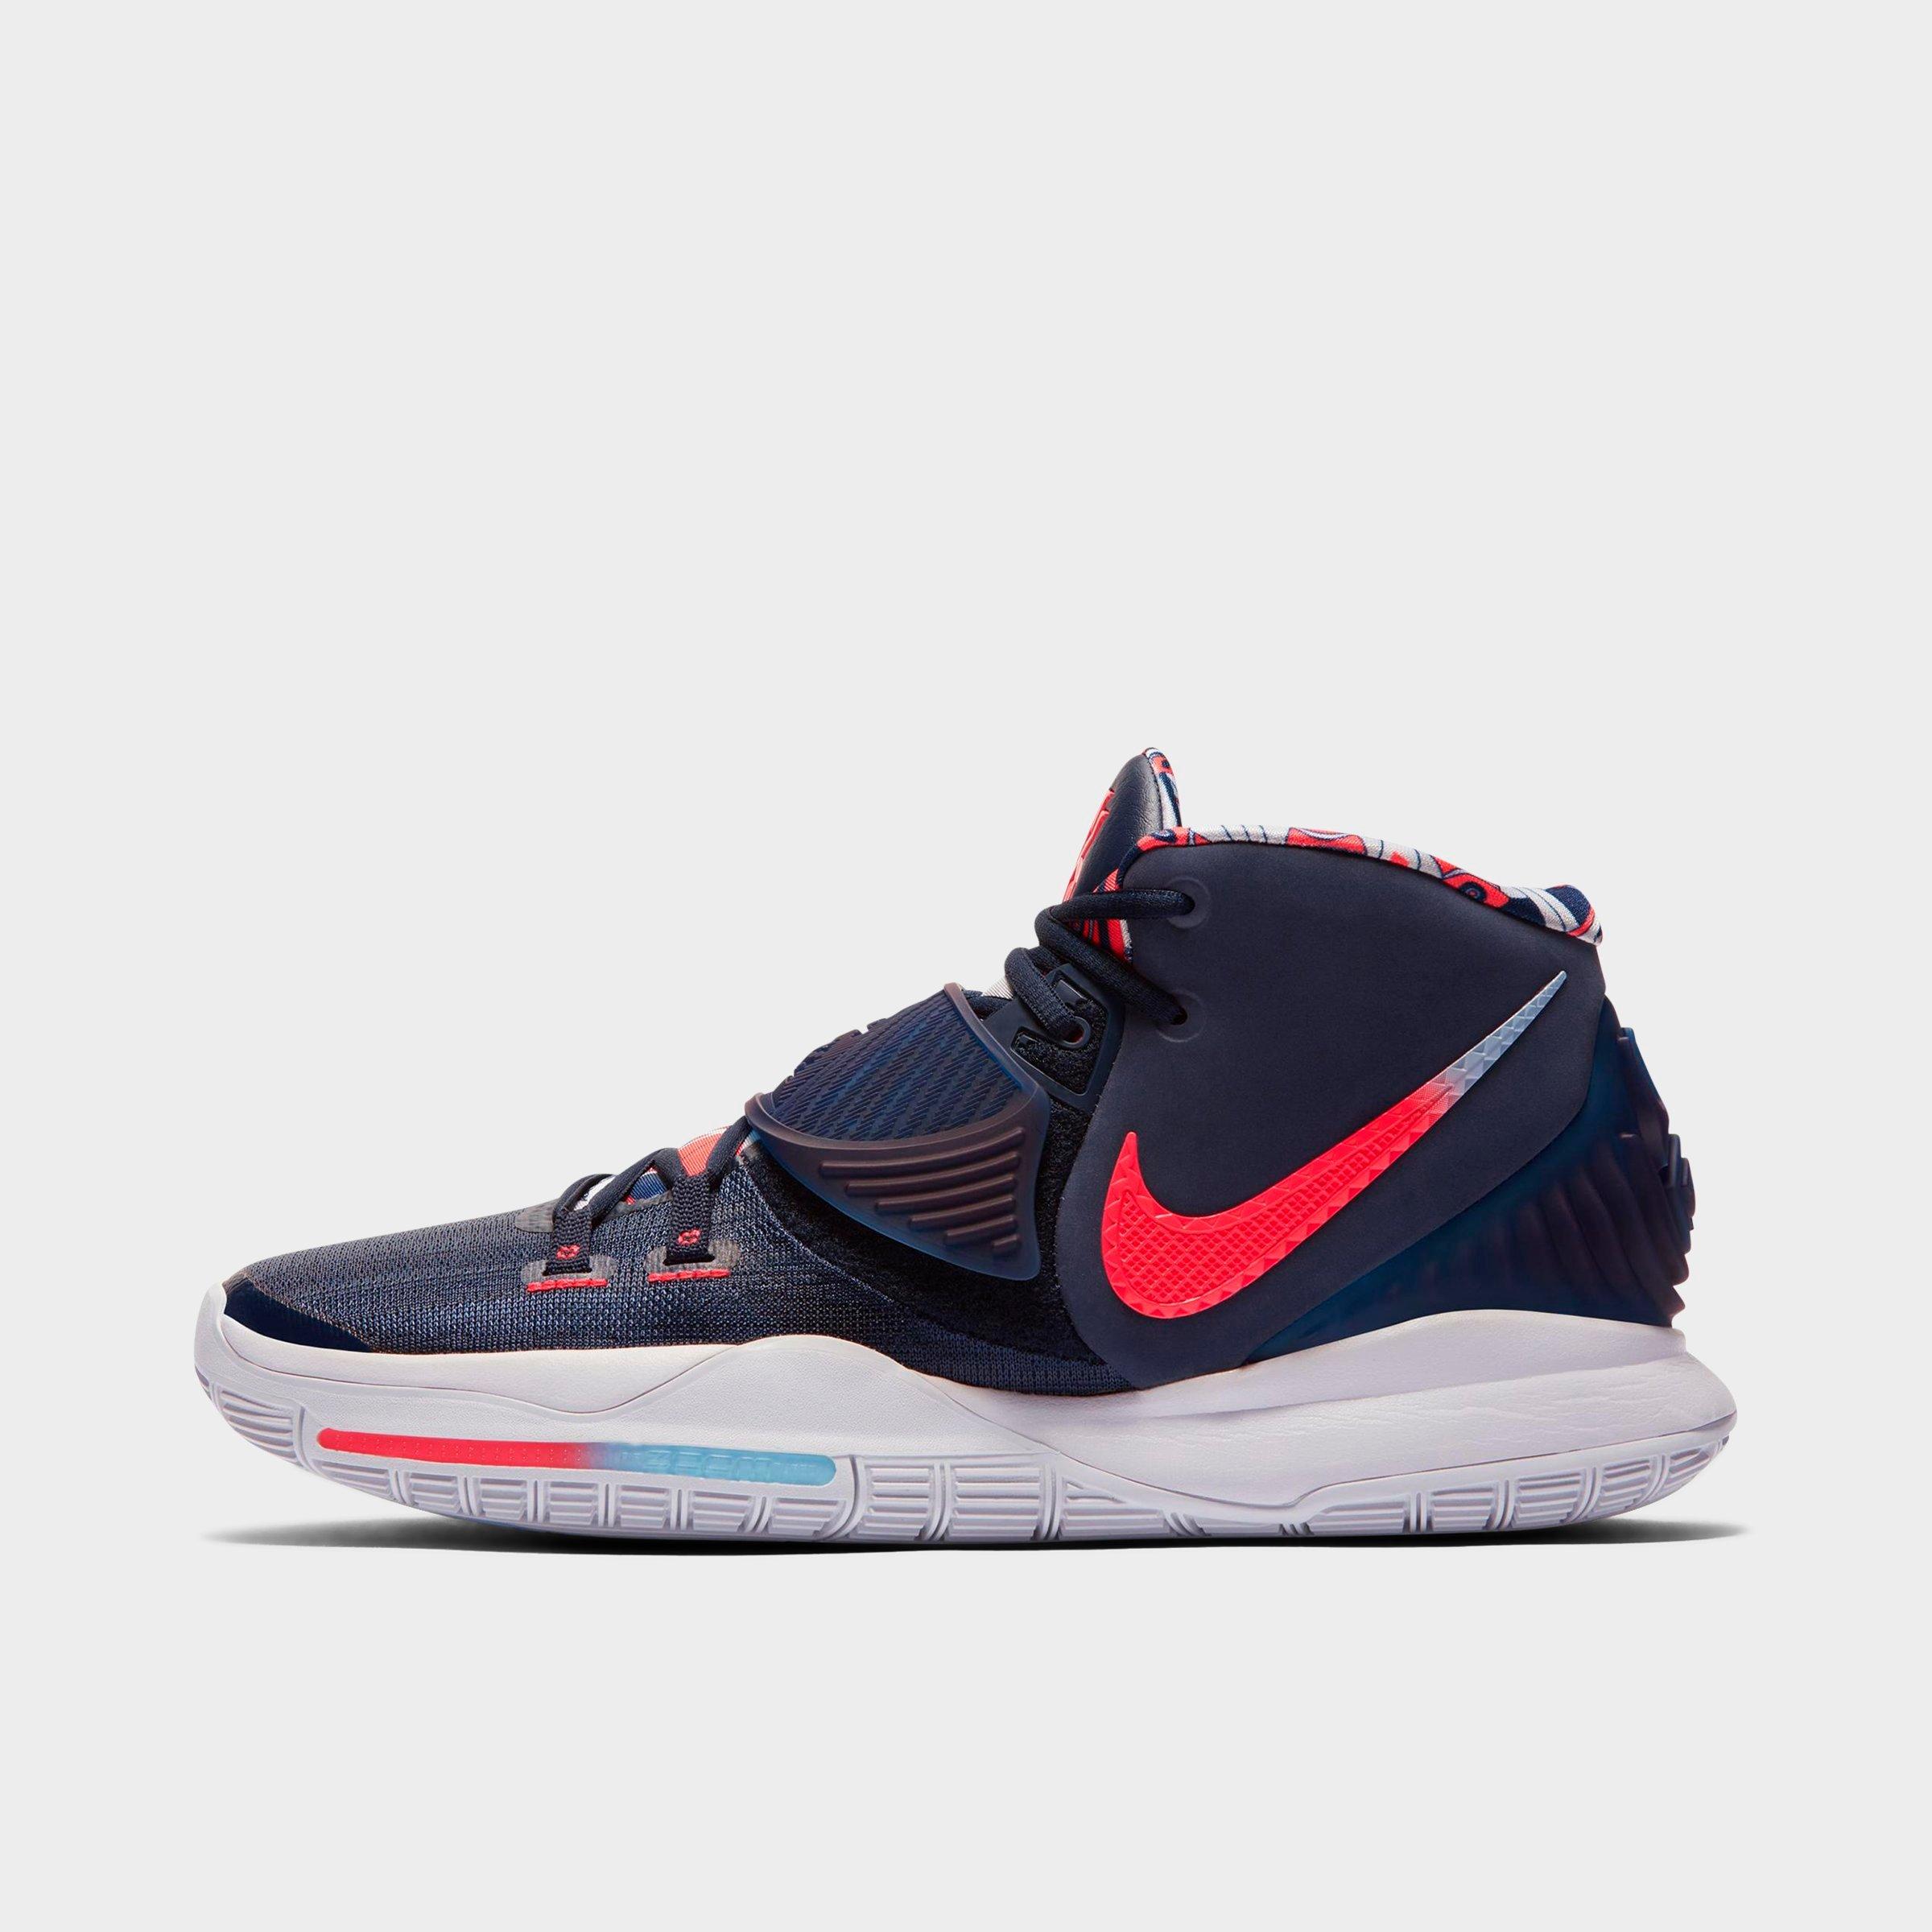 kyrie irving shoes kids